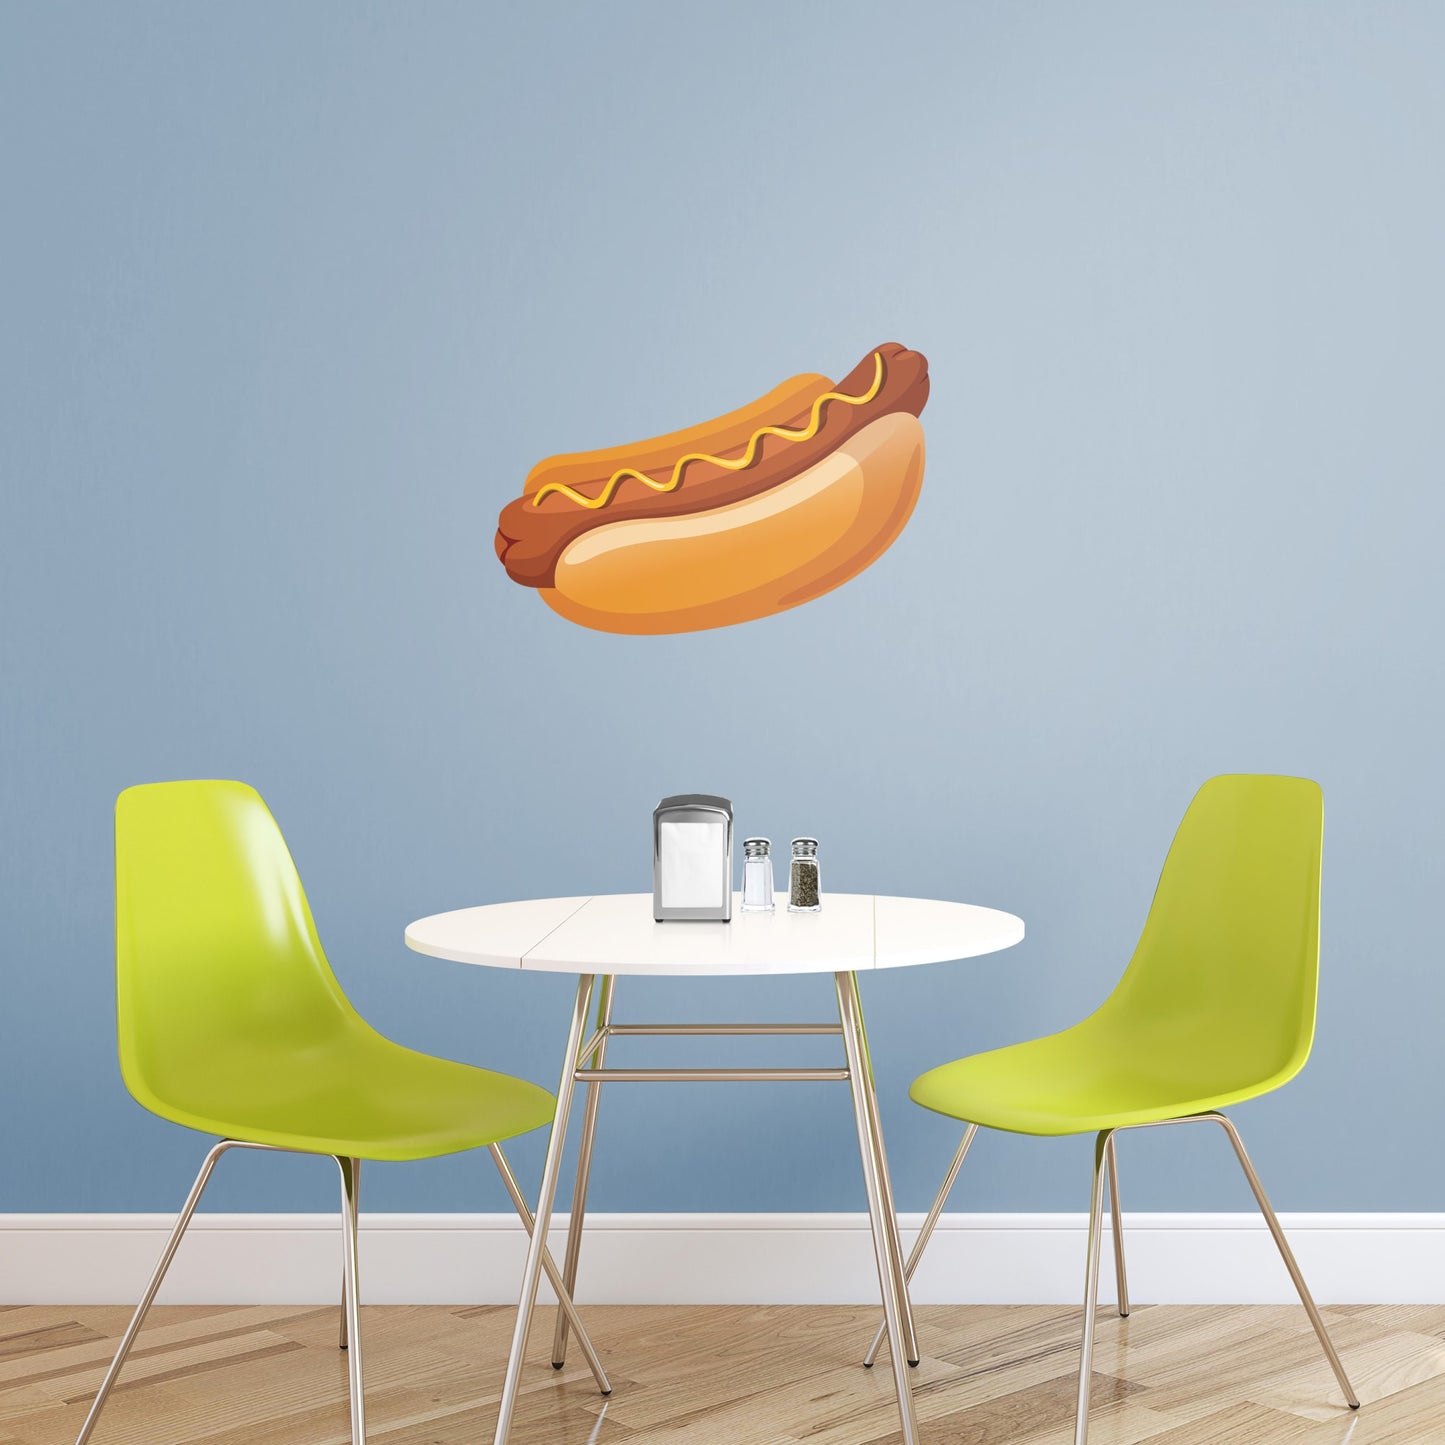 X-Large Hot Dog + 2 Decals (34"W x 22"H)